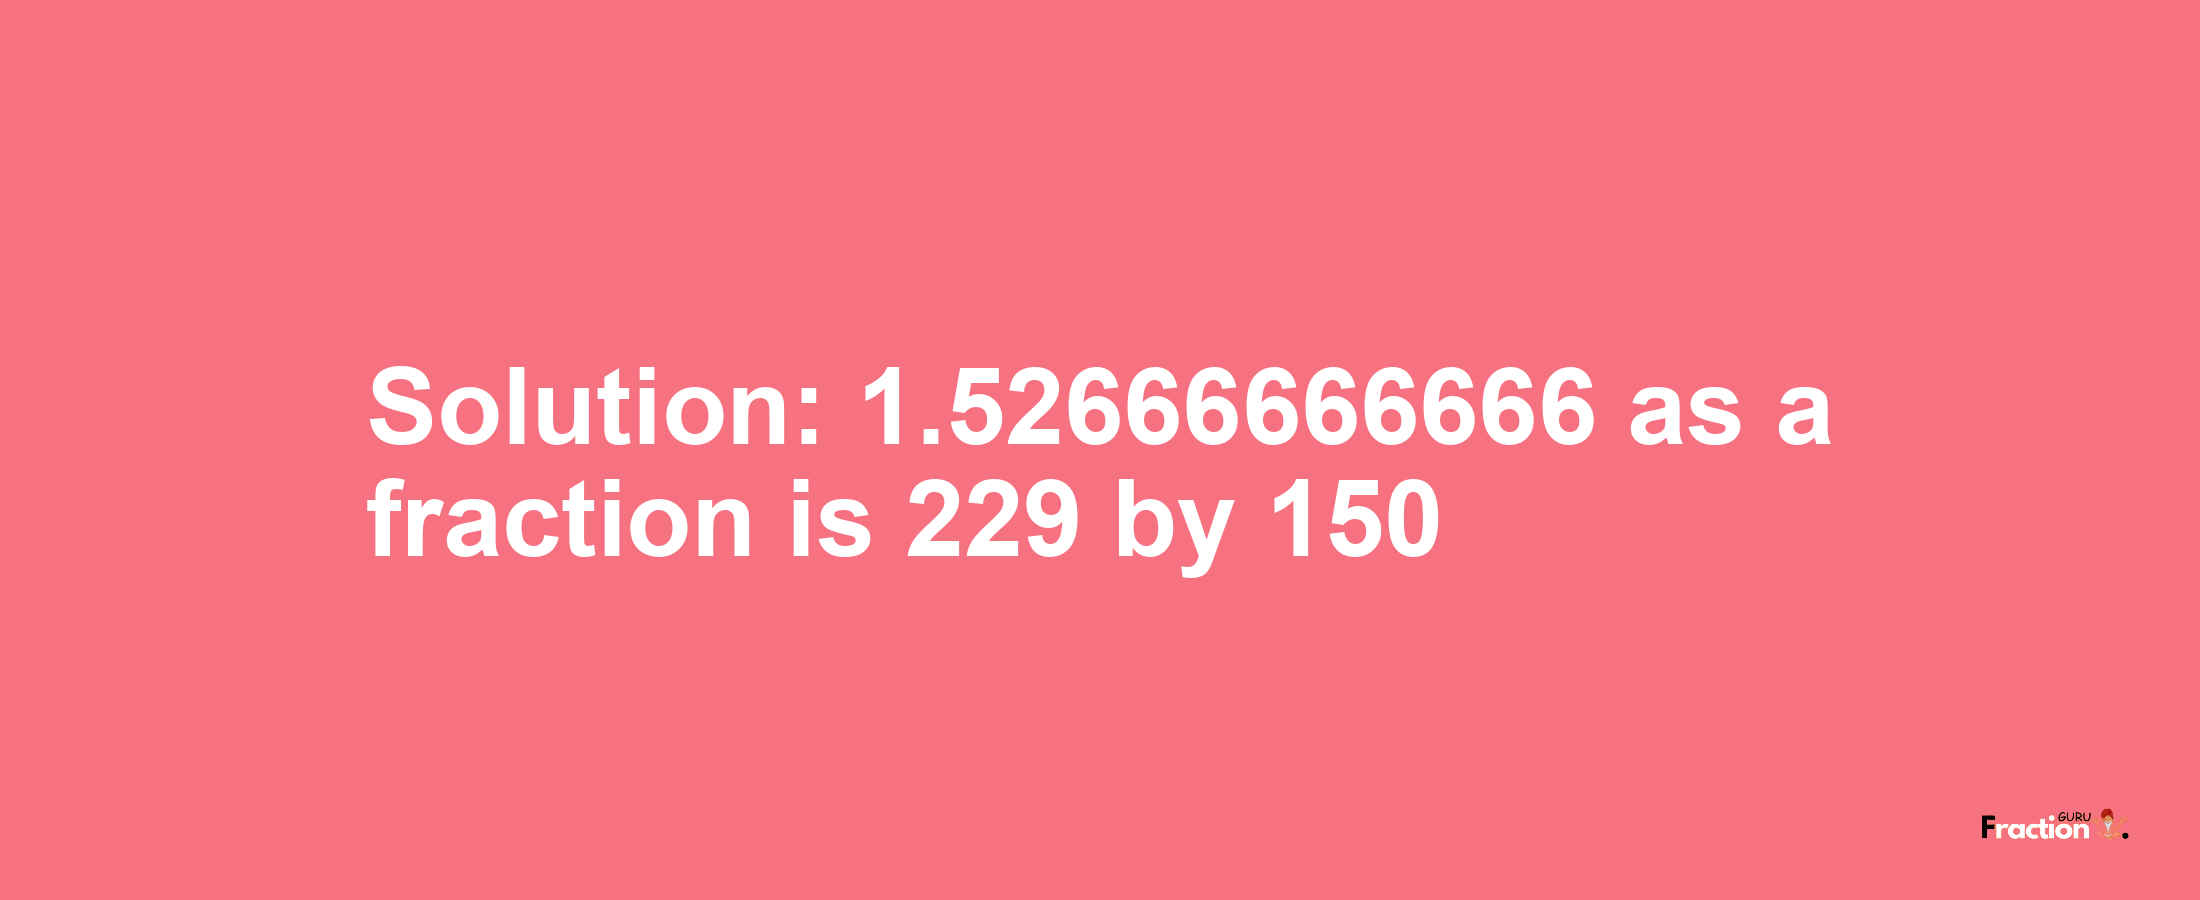 Solution:1.52666666666 as a fraction is 229/150